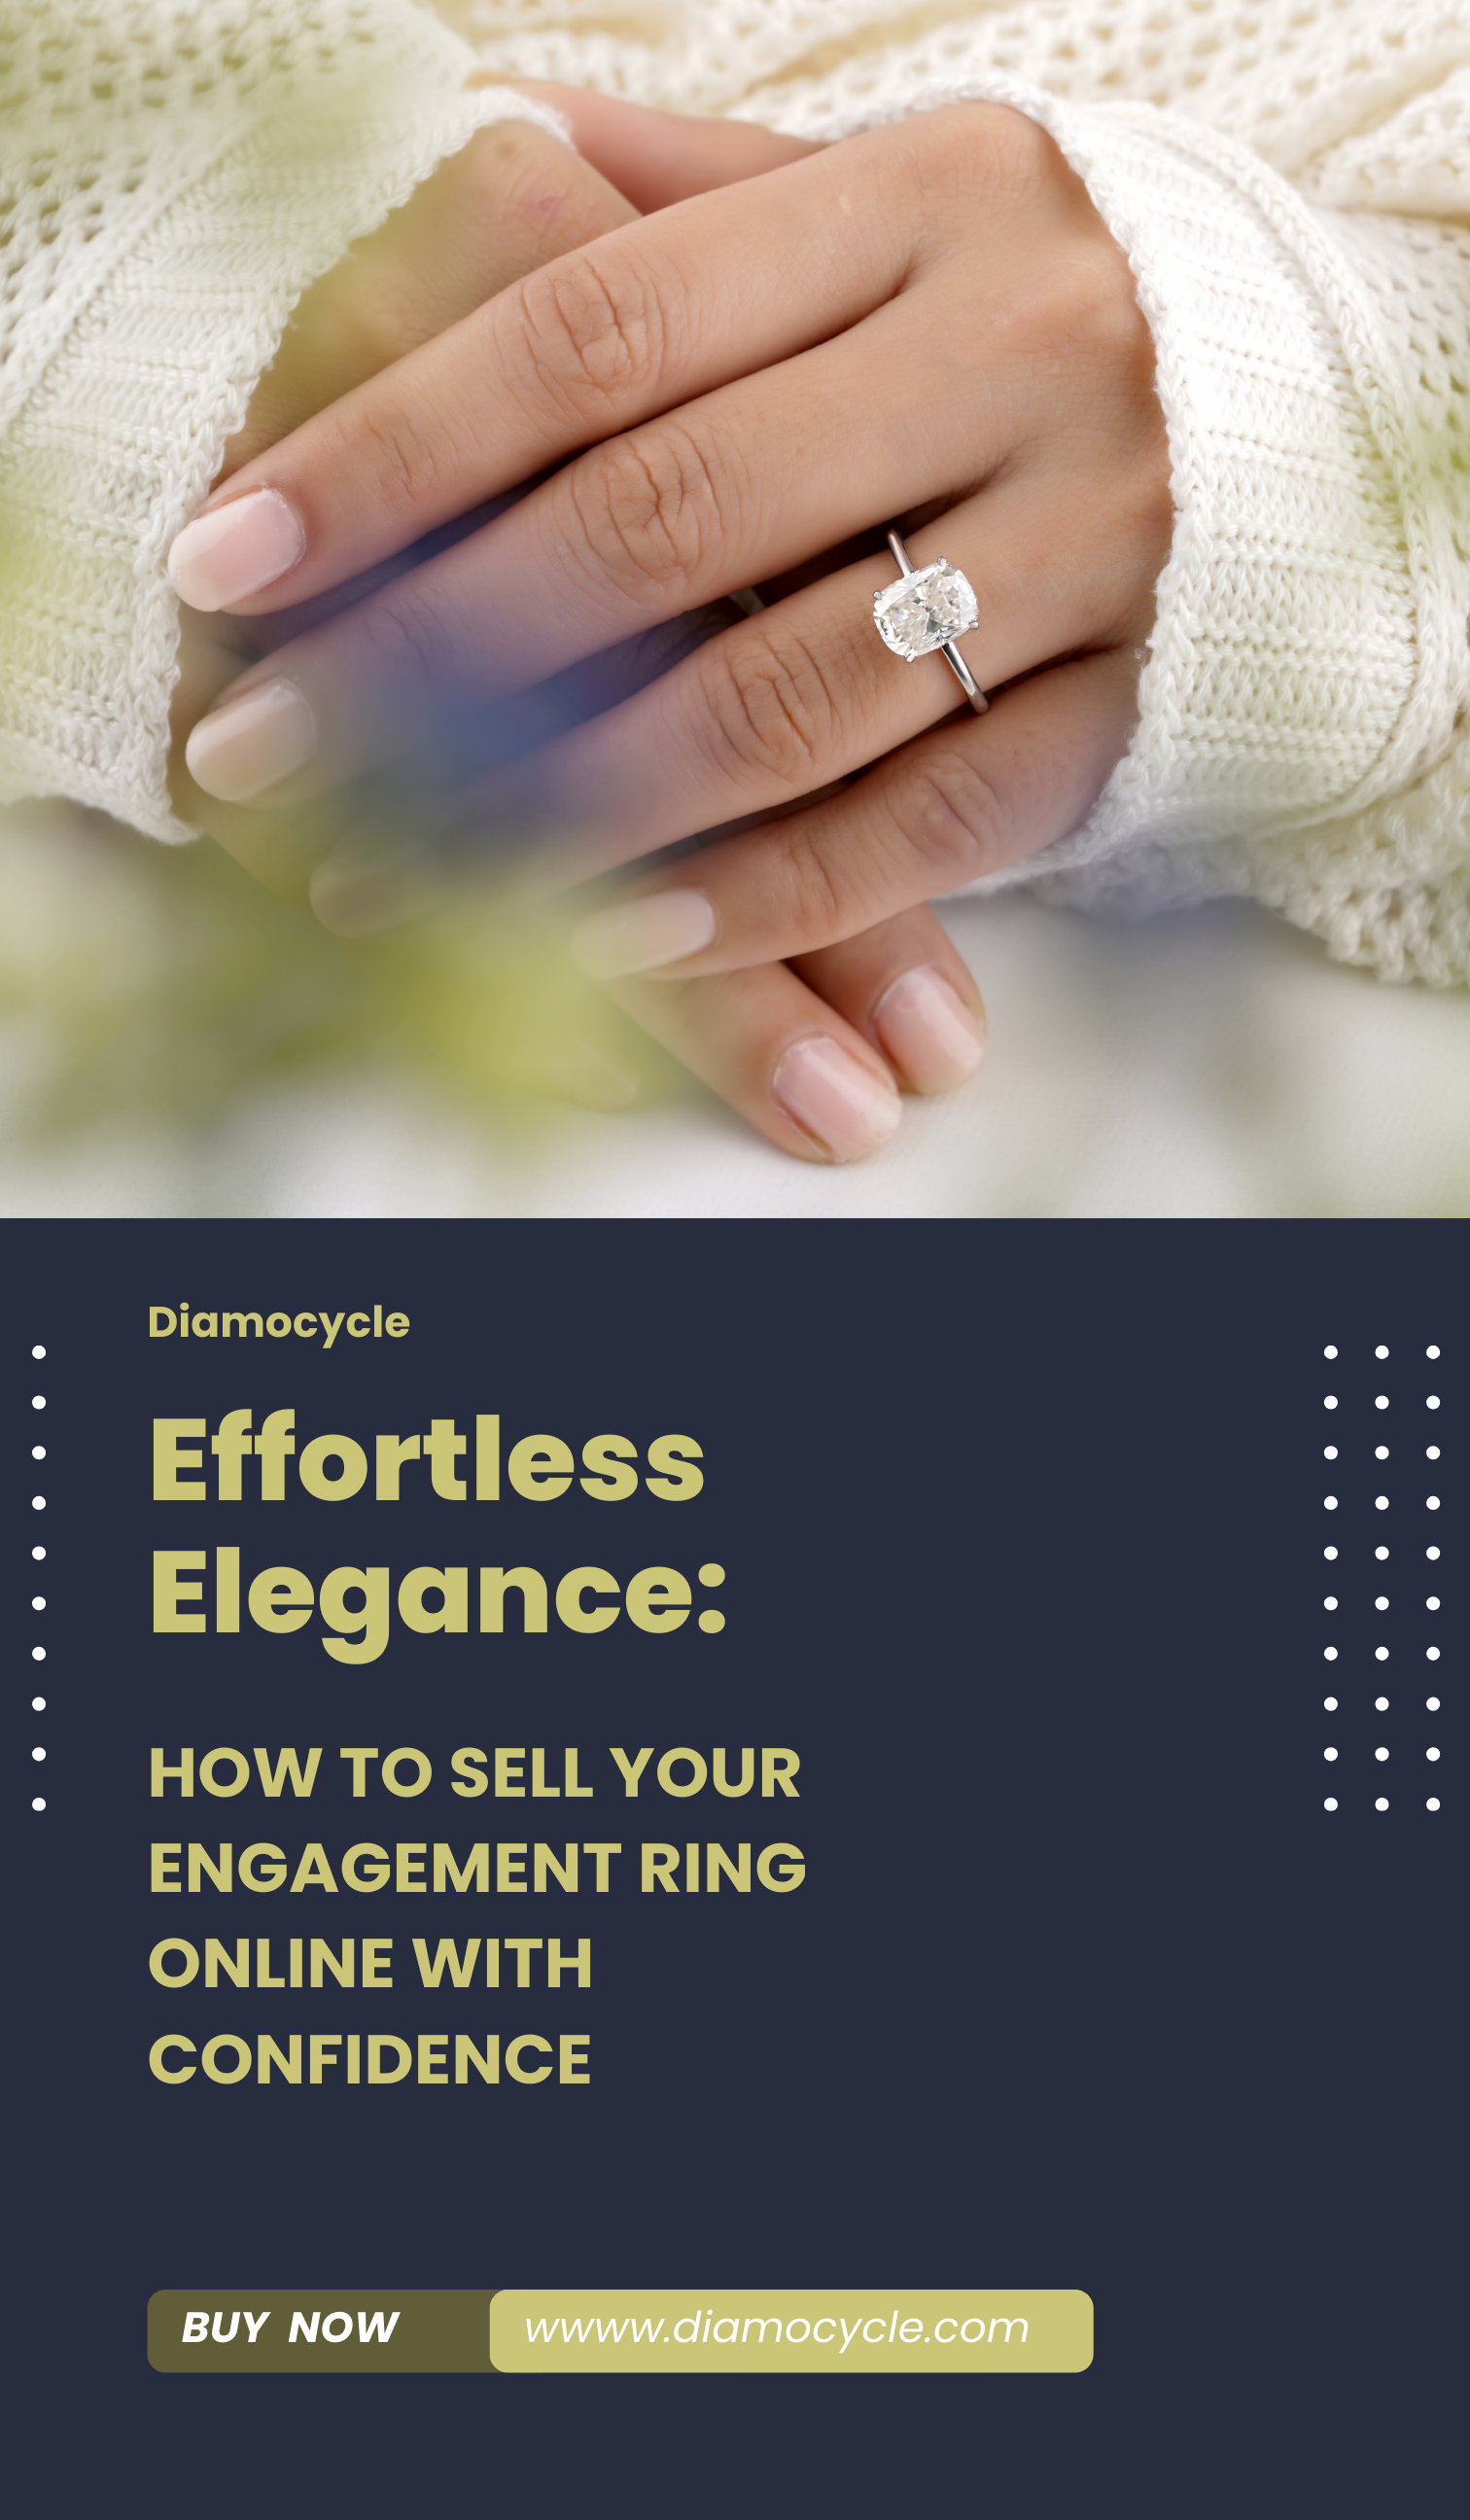 Effortless Elegance: How to Sell Your Engagement Ring Online with Confidence